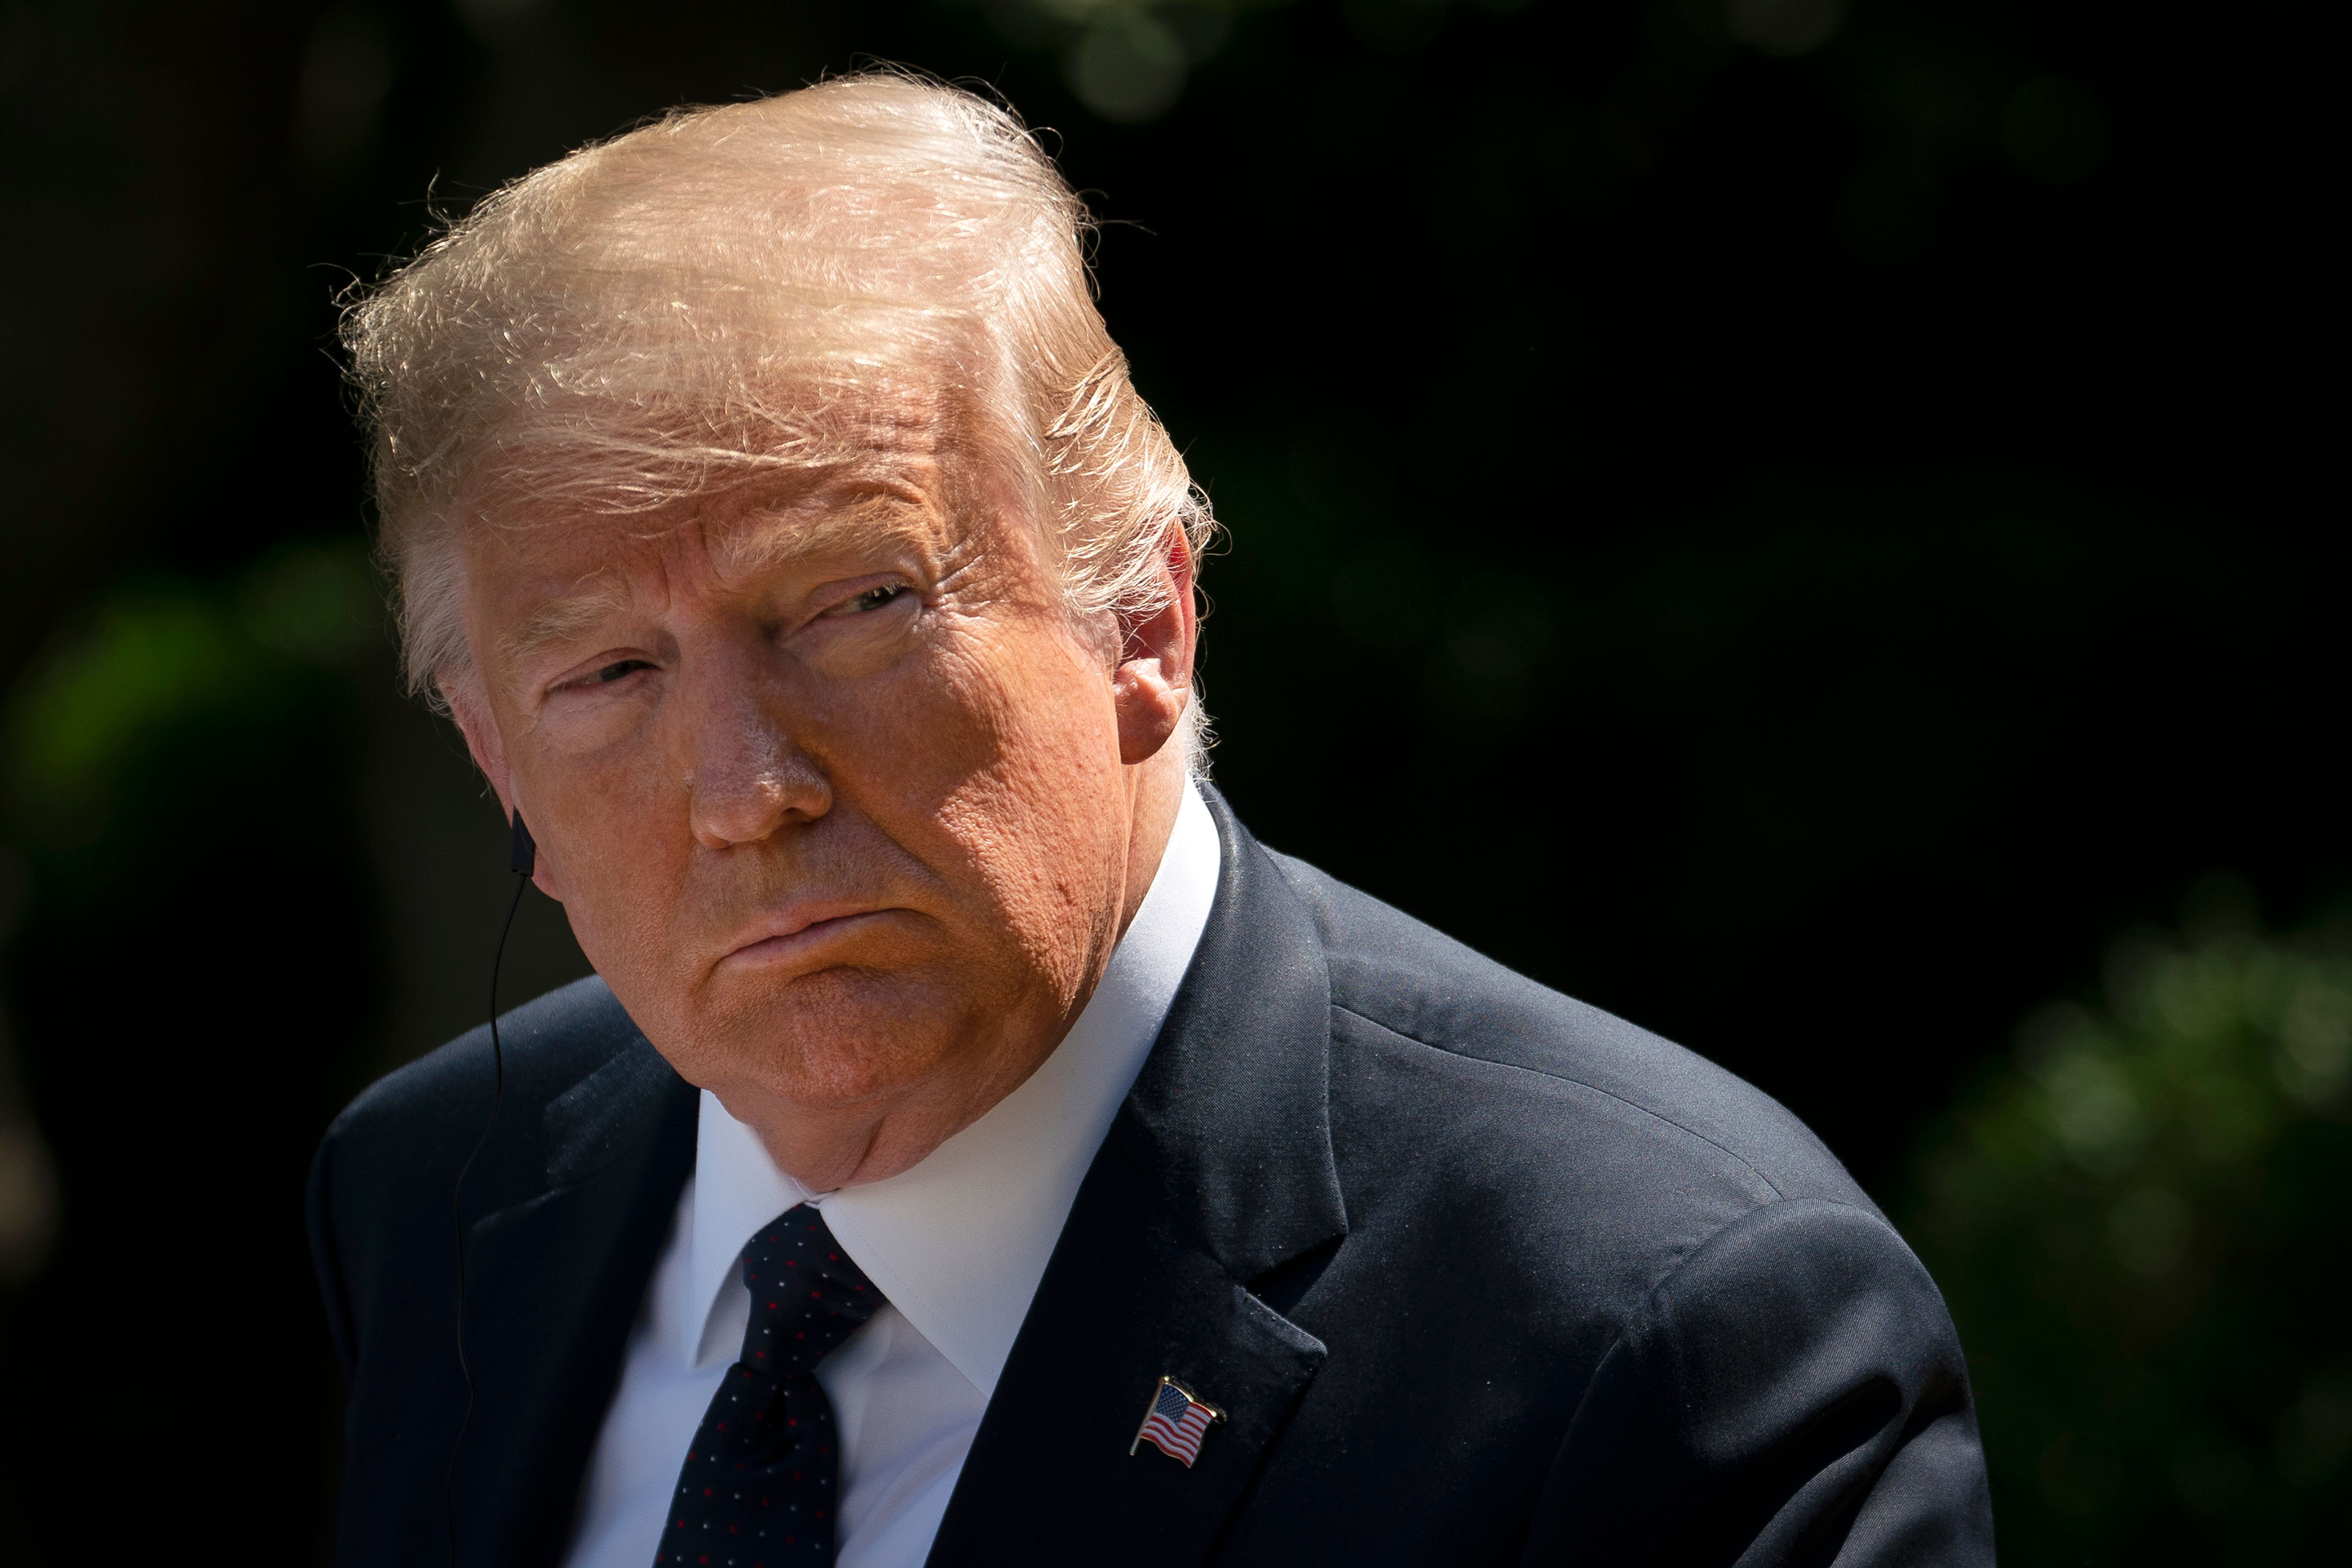 President Donald Trump attends a news conference at the White House on June 24 in Washington.